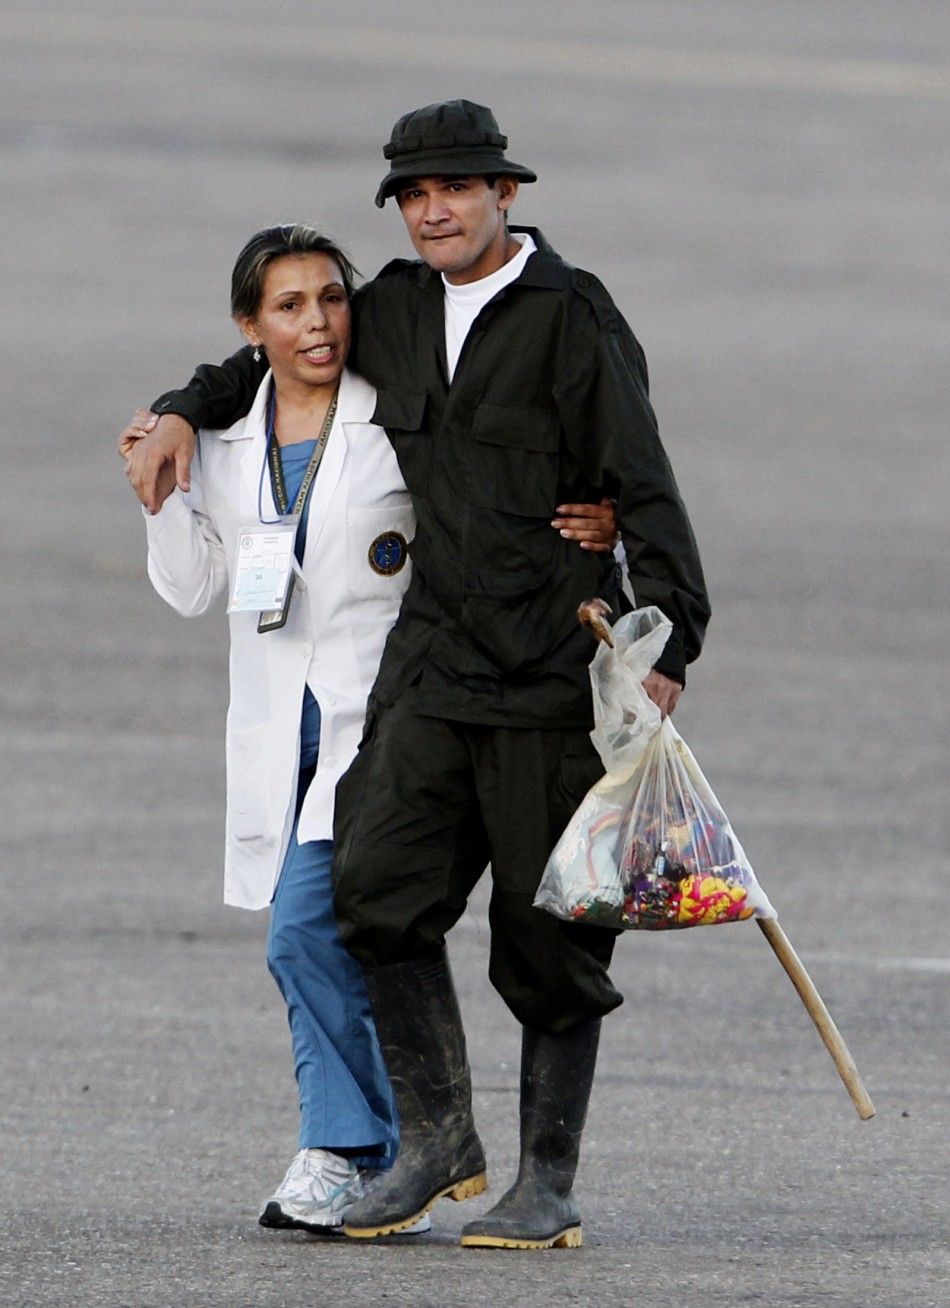 A recently freed hostage walks with a medical personnel as they arrive at Villavicencio039s airport